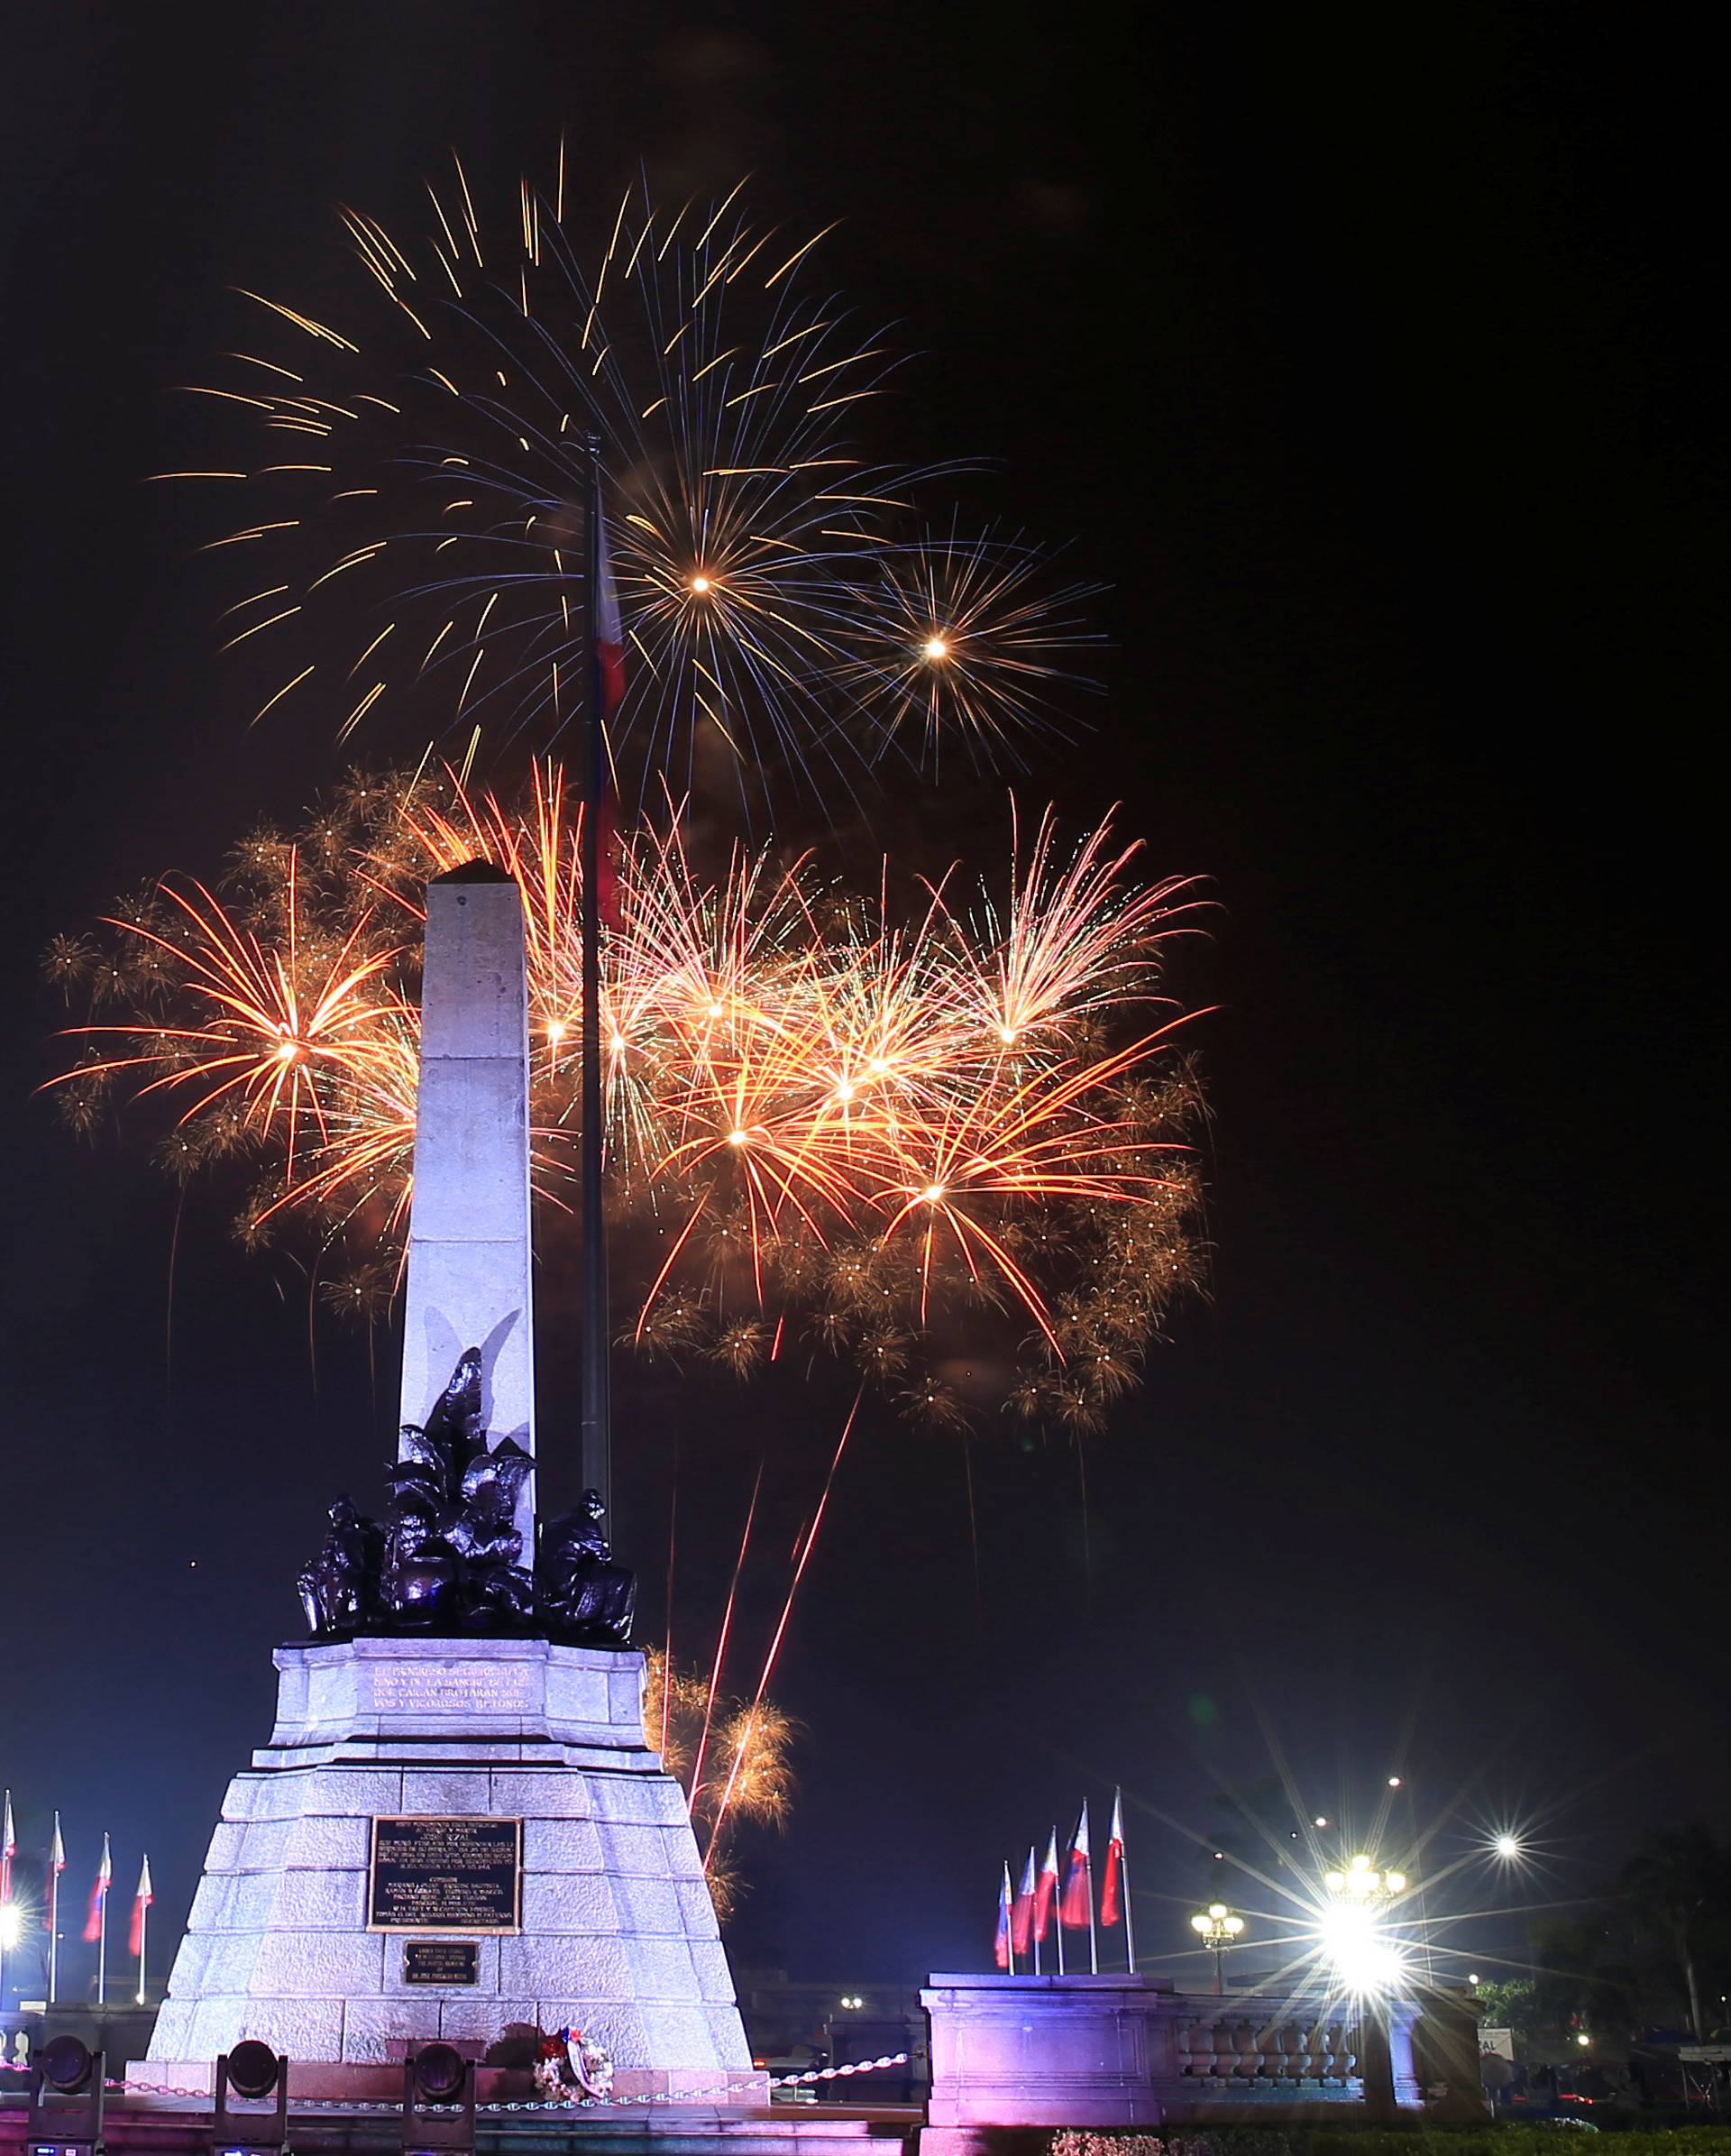 Fireworks explode over the monument of national hero Jose Rizal during New Year celebrations in Luneta park, metro Manila, Philippines